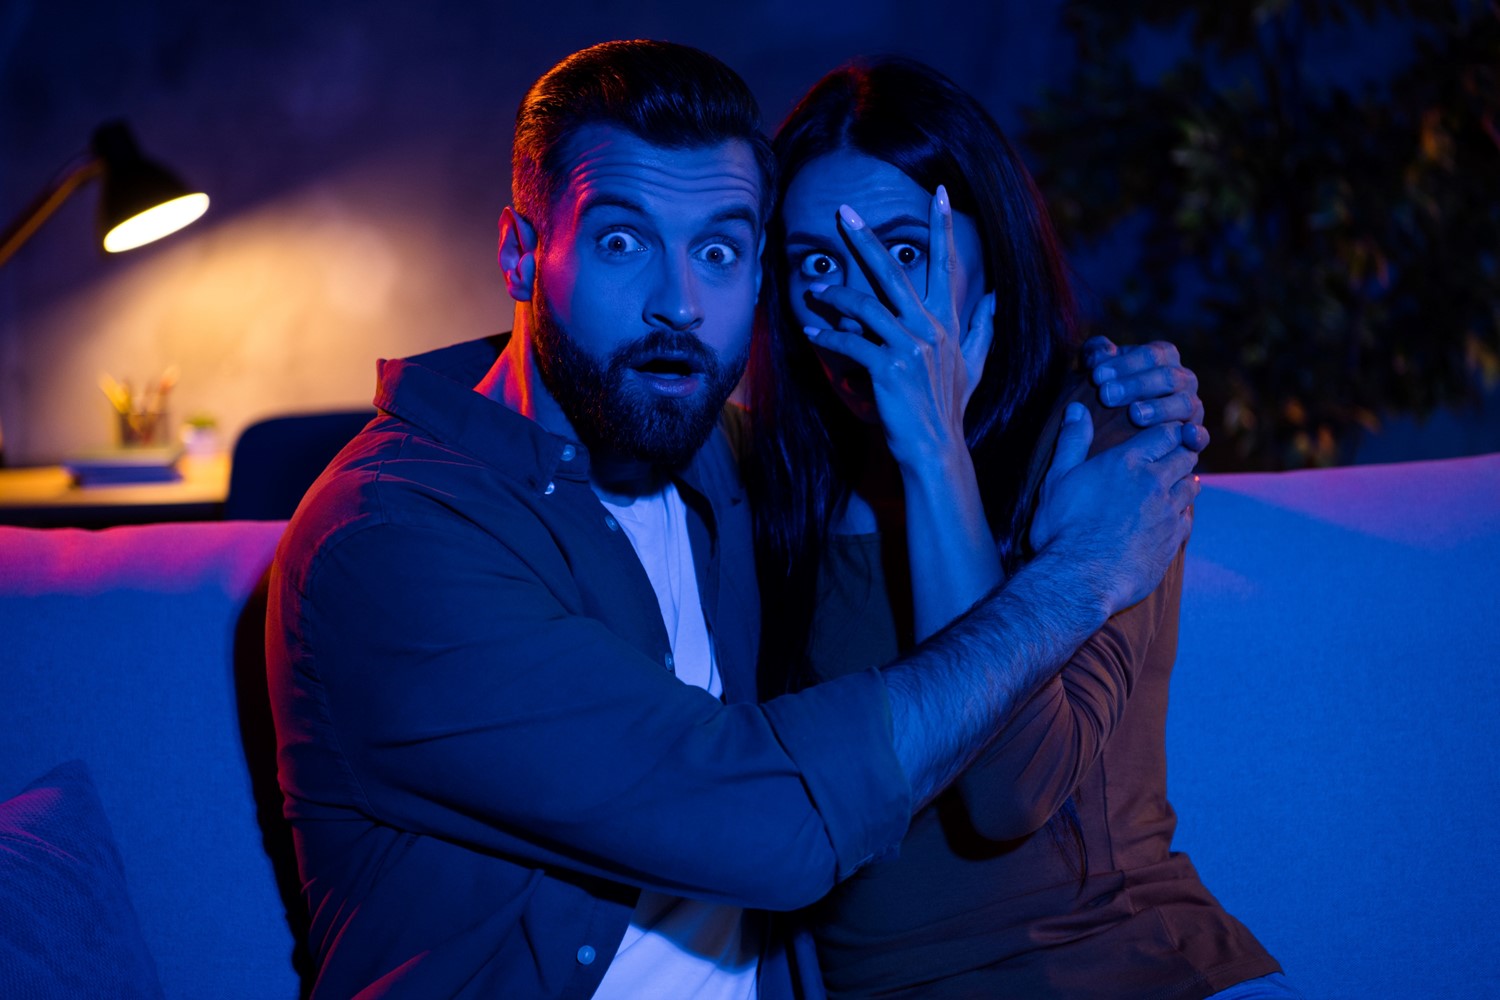 A Man with a Starled Expression Embraces a Scared Woman with Her Hand Over Her Face Peeking Through Her Eyes